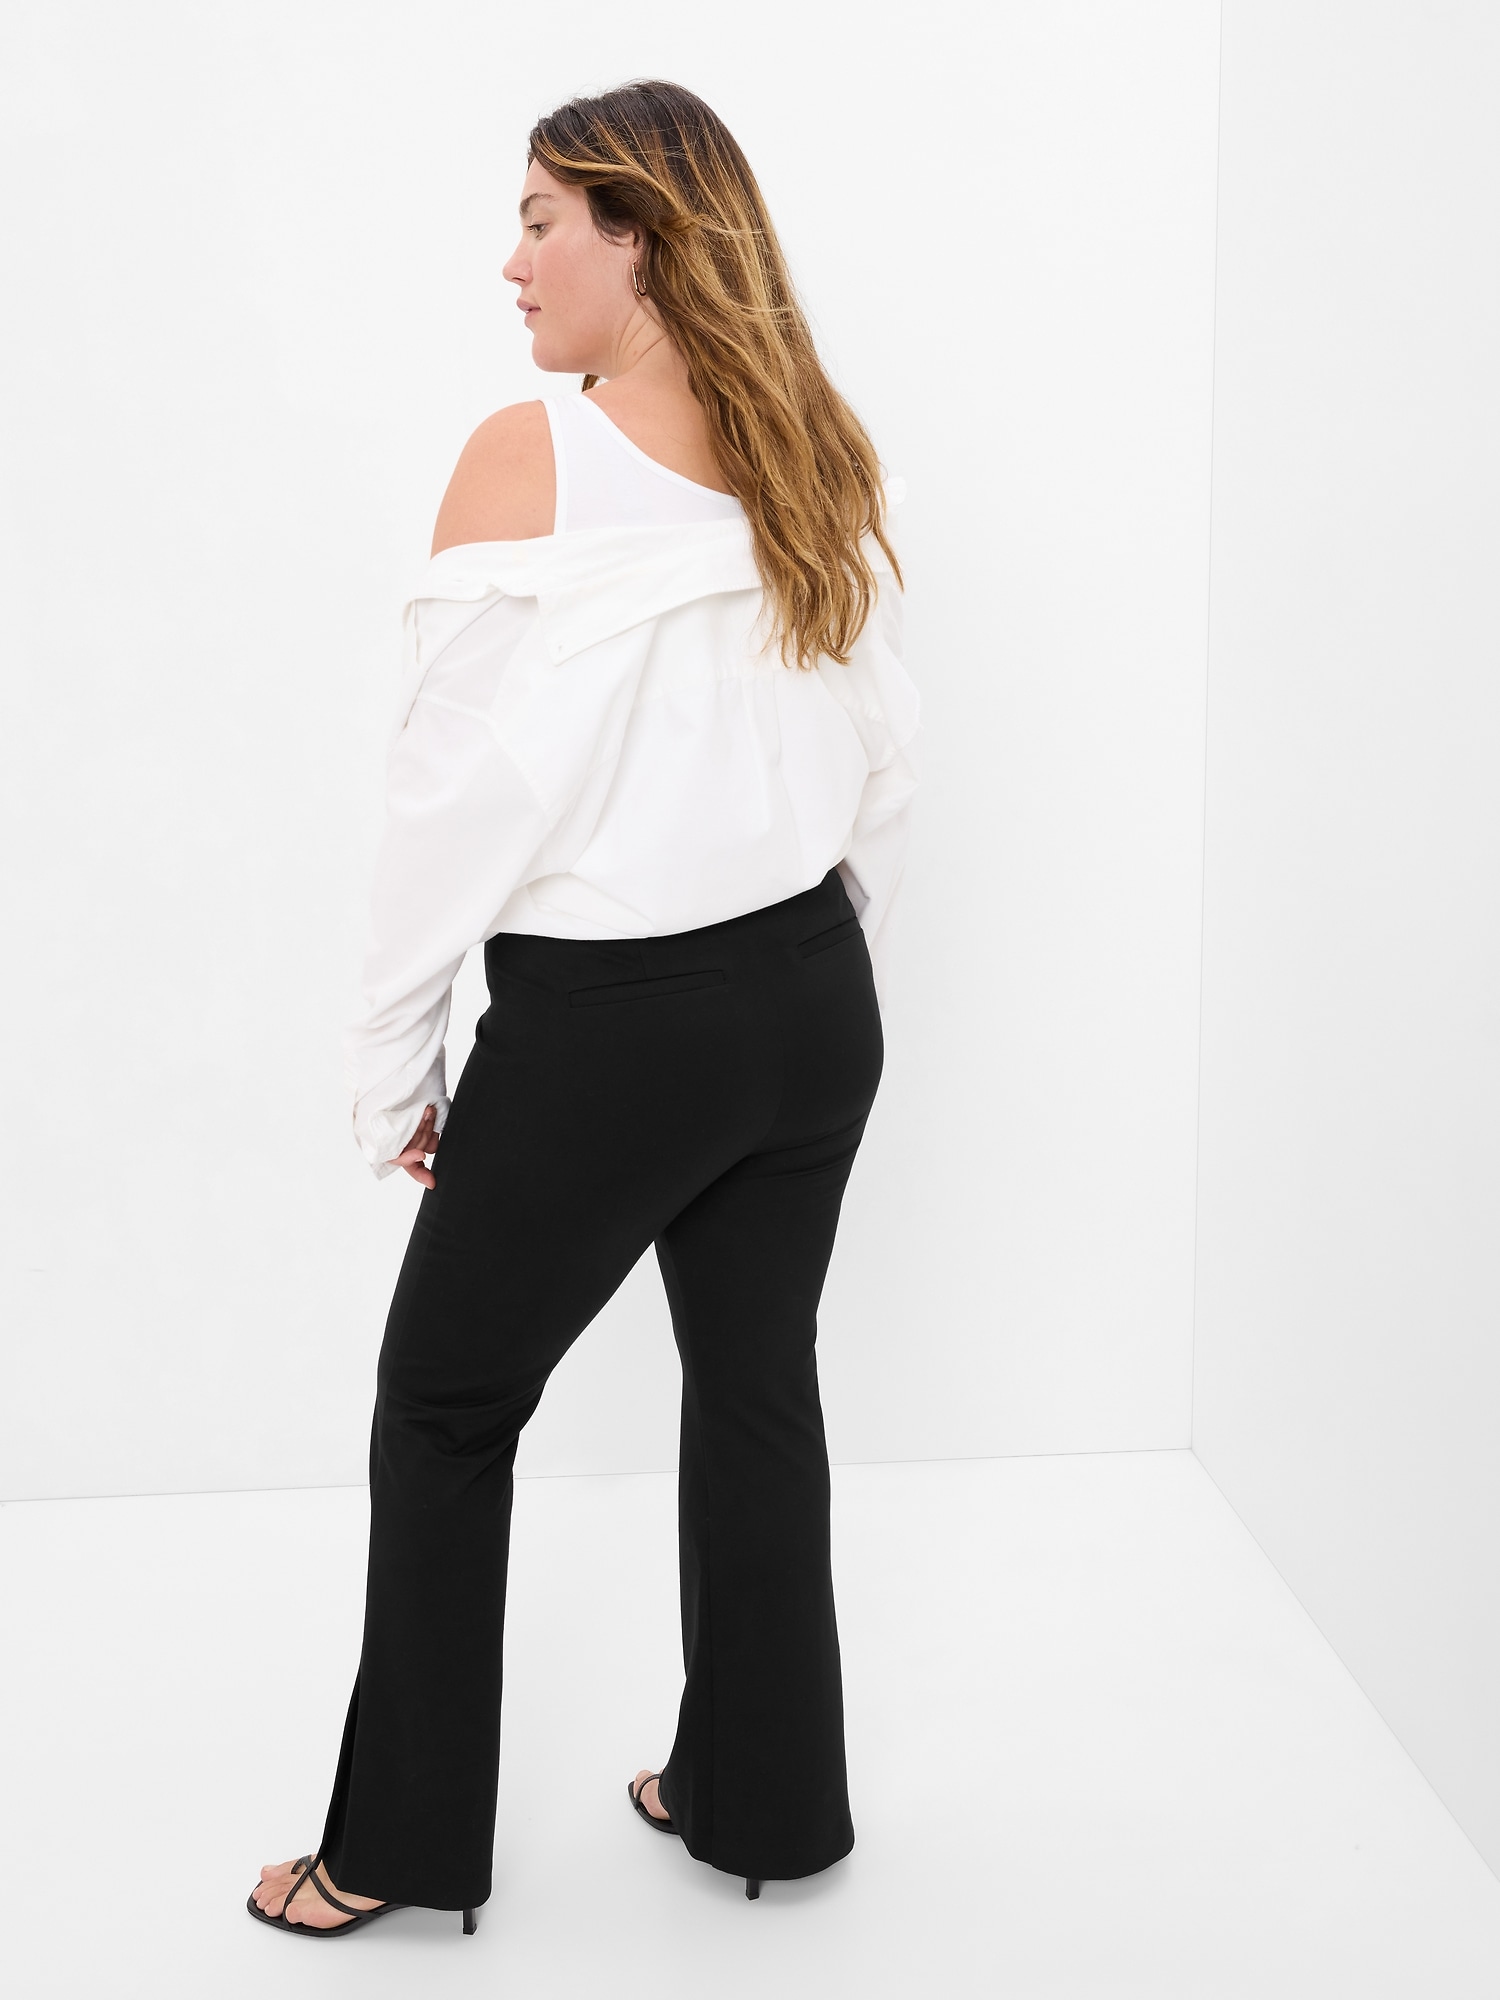 Black flared pants with ankle slit